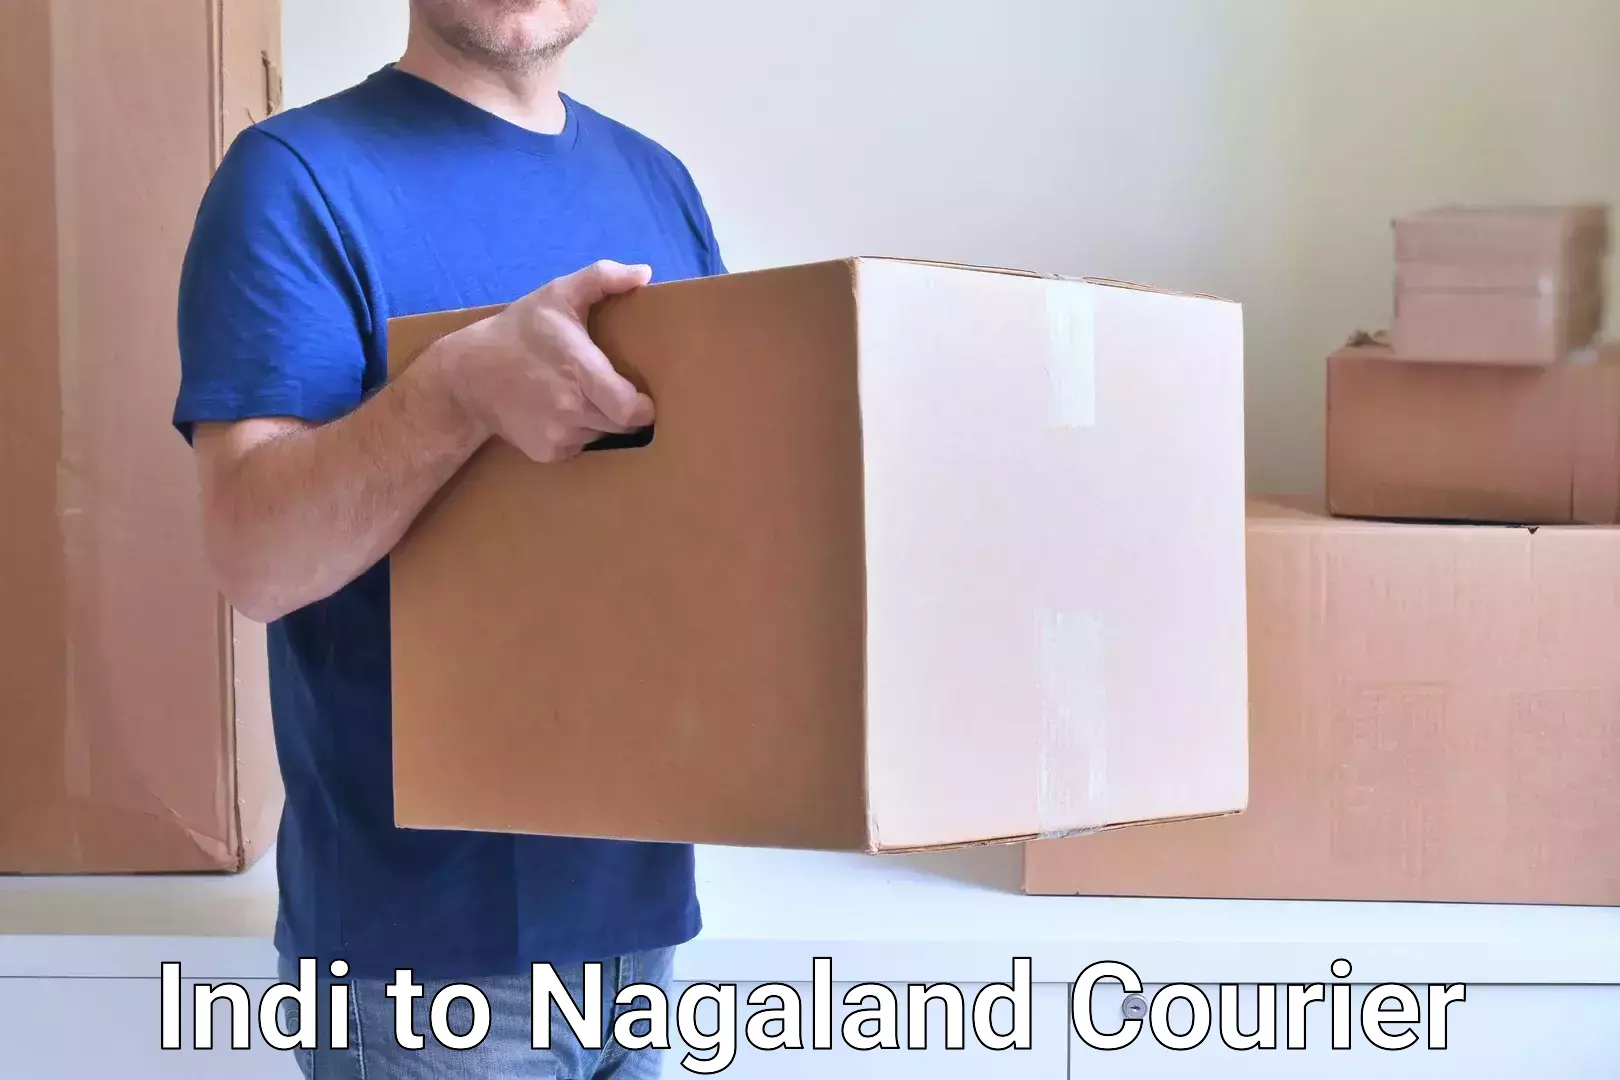 Medical delivery services in Indi to Nagaland